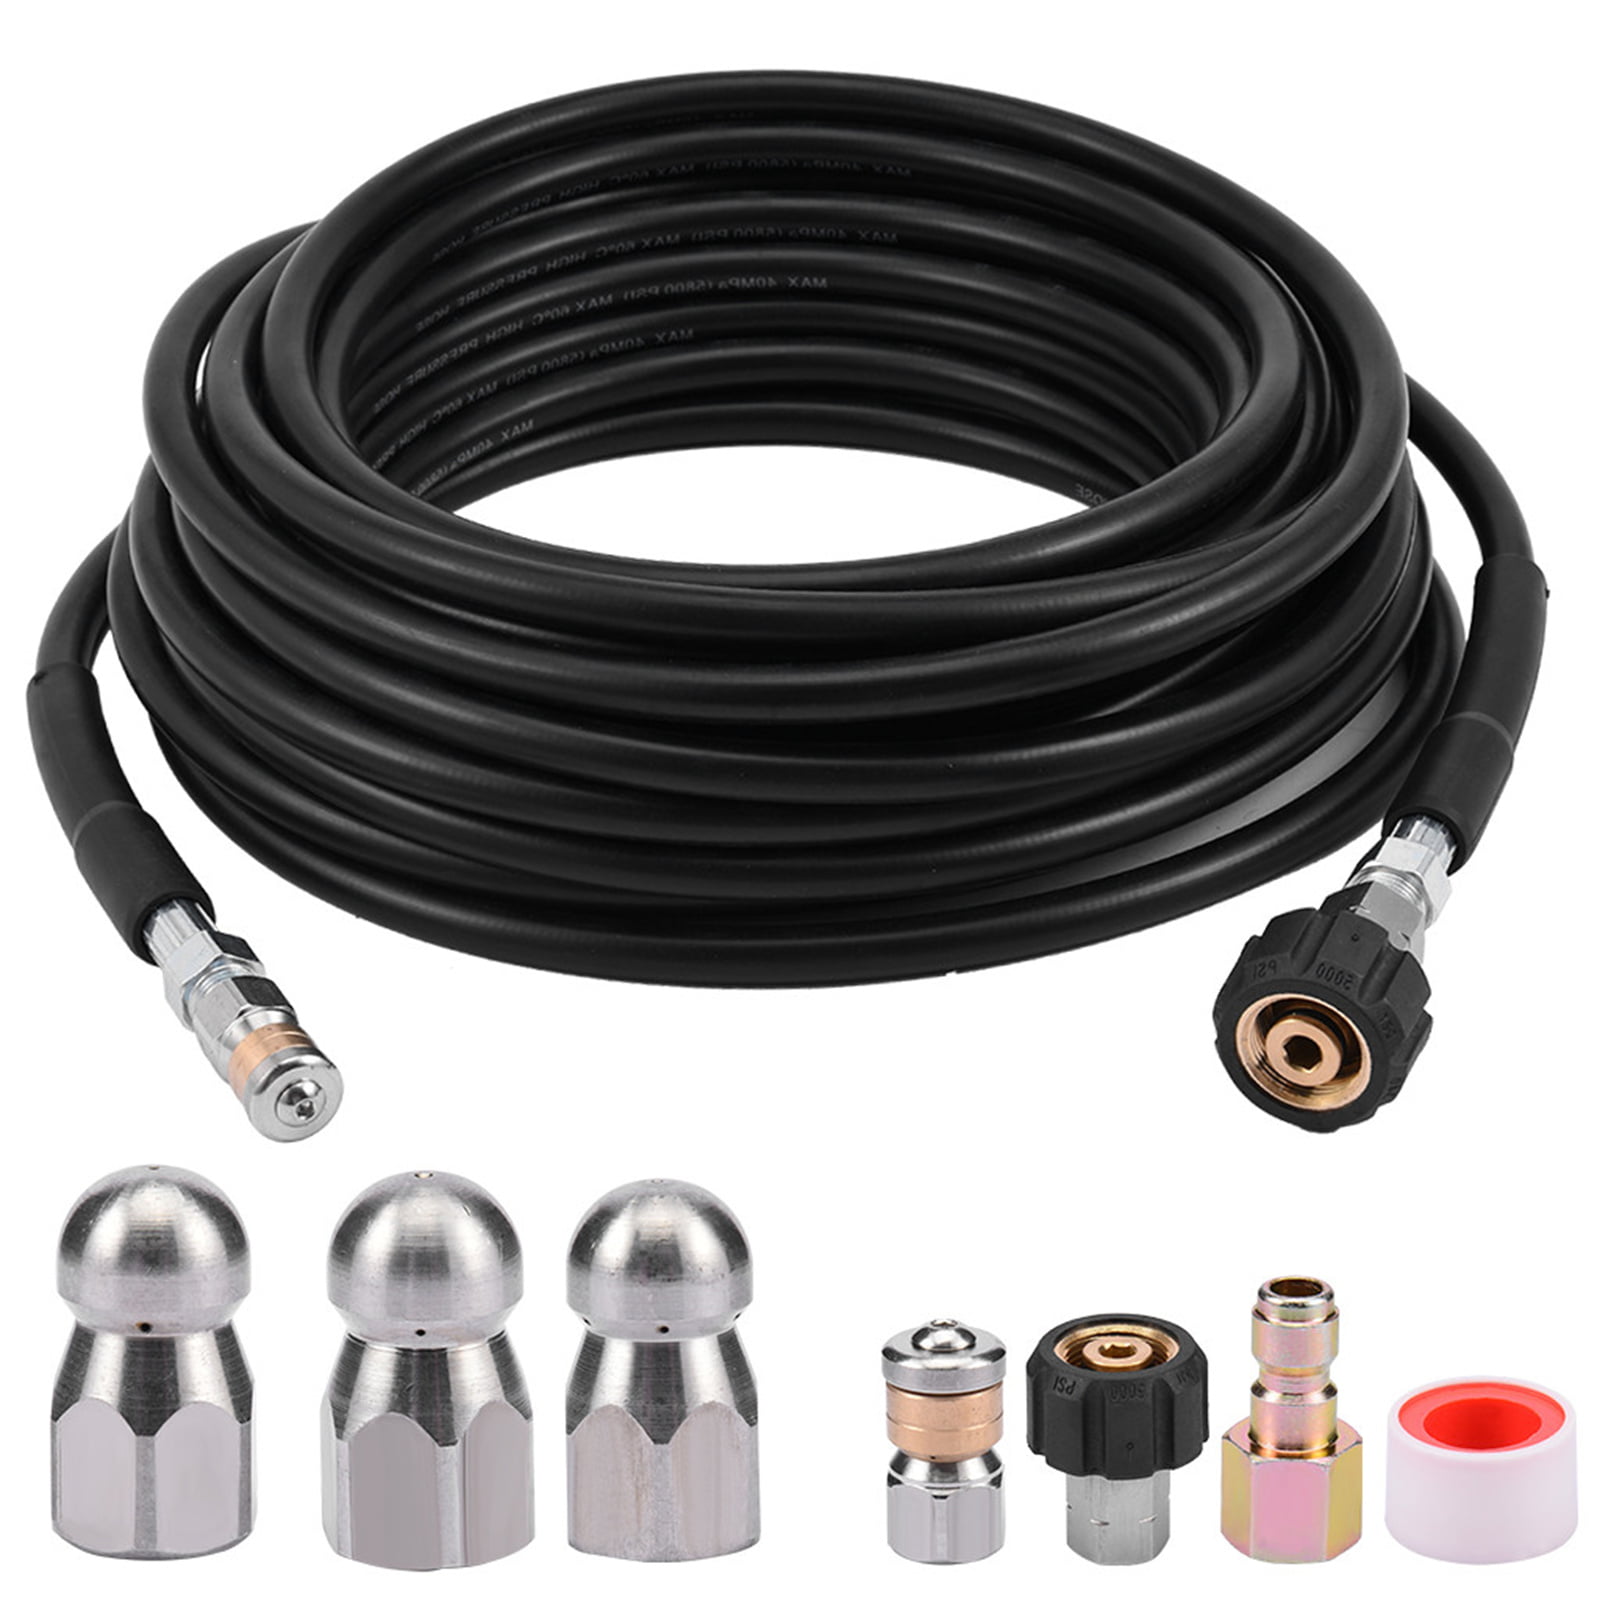 Pressure Washer Jetter Sewer Hose Kit 5800 PSI 100 FT Drain Cleaning Hose 